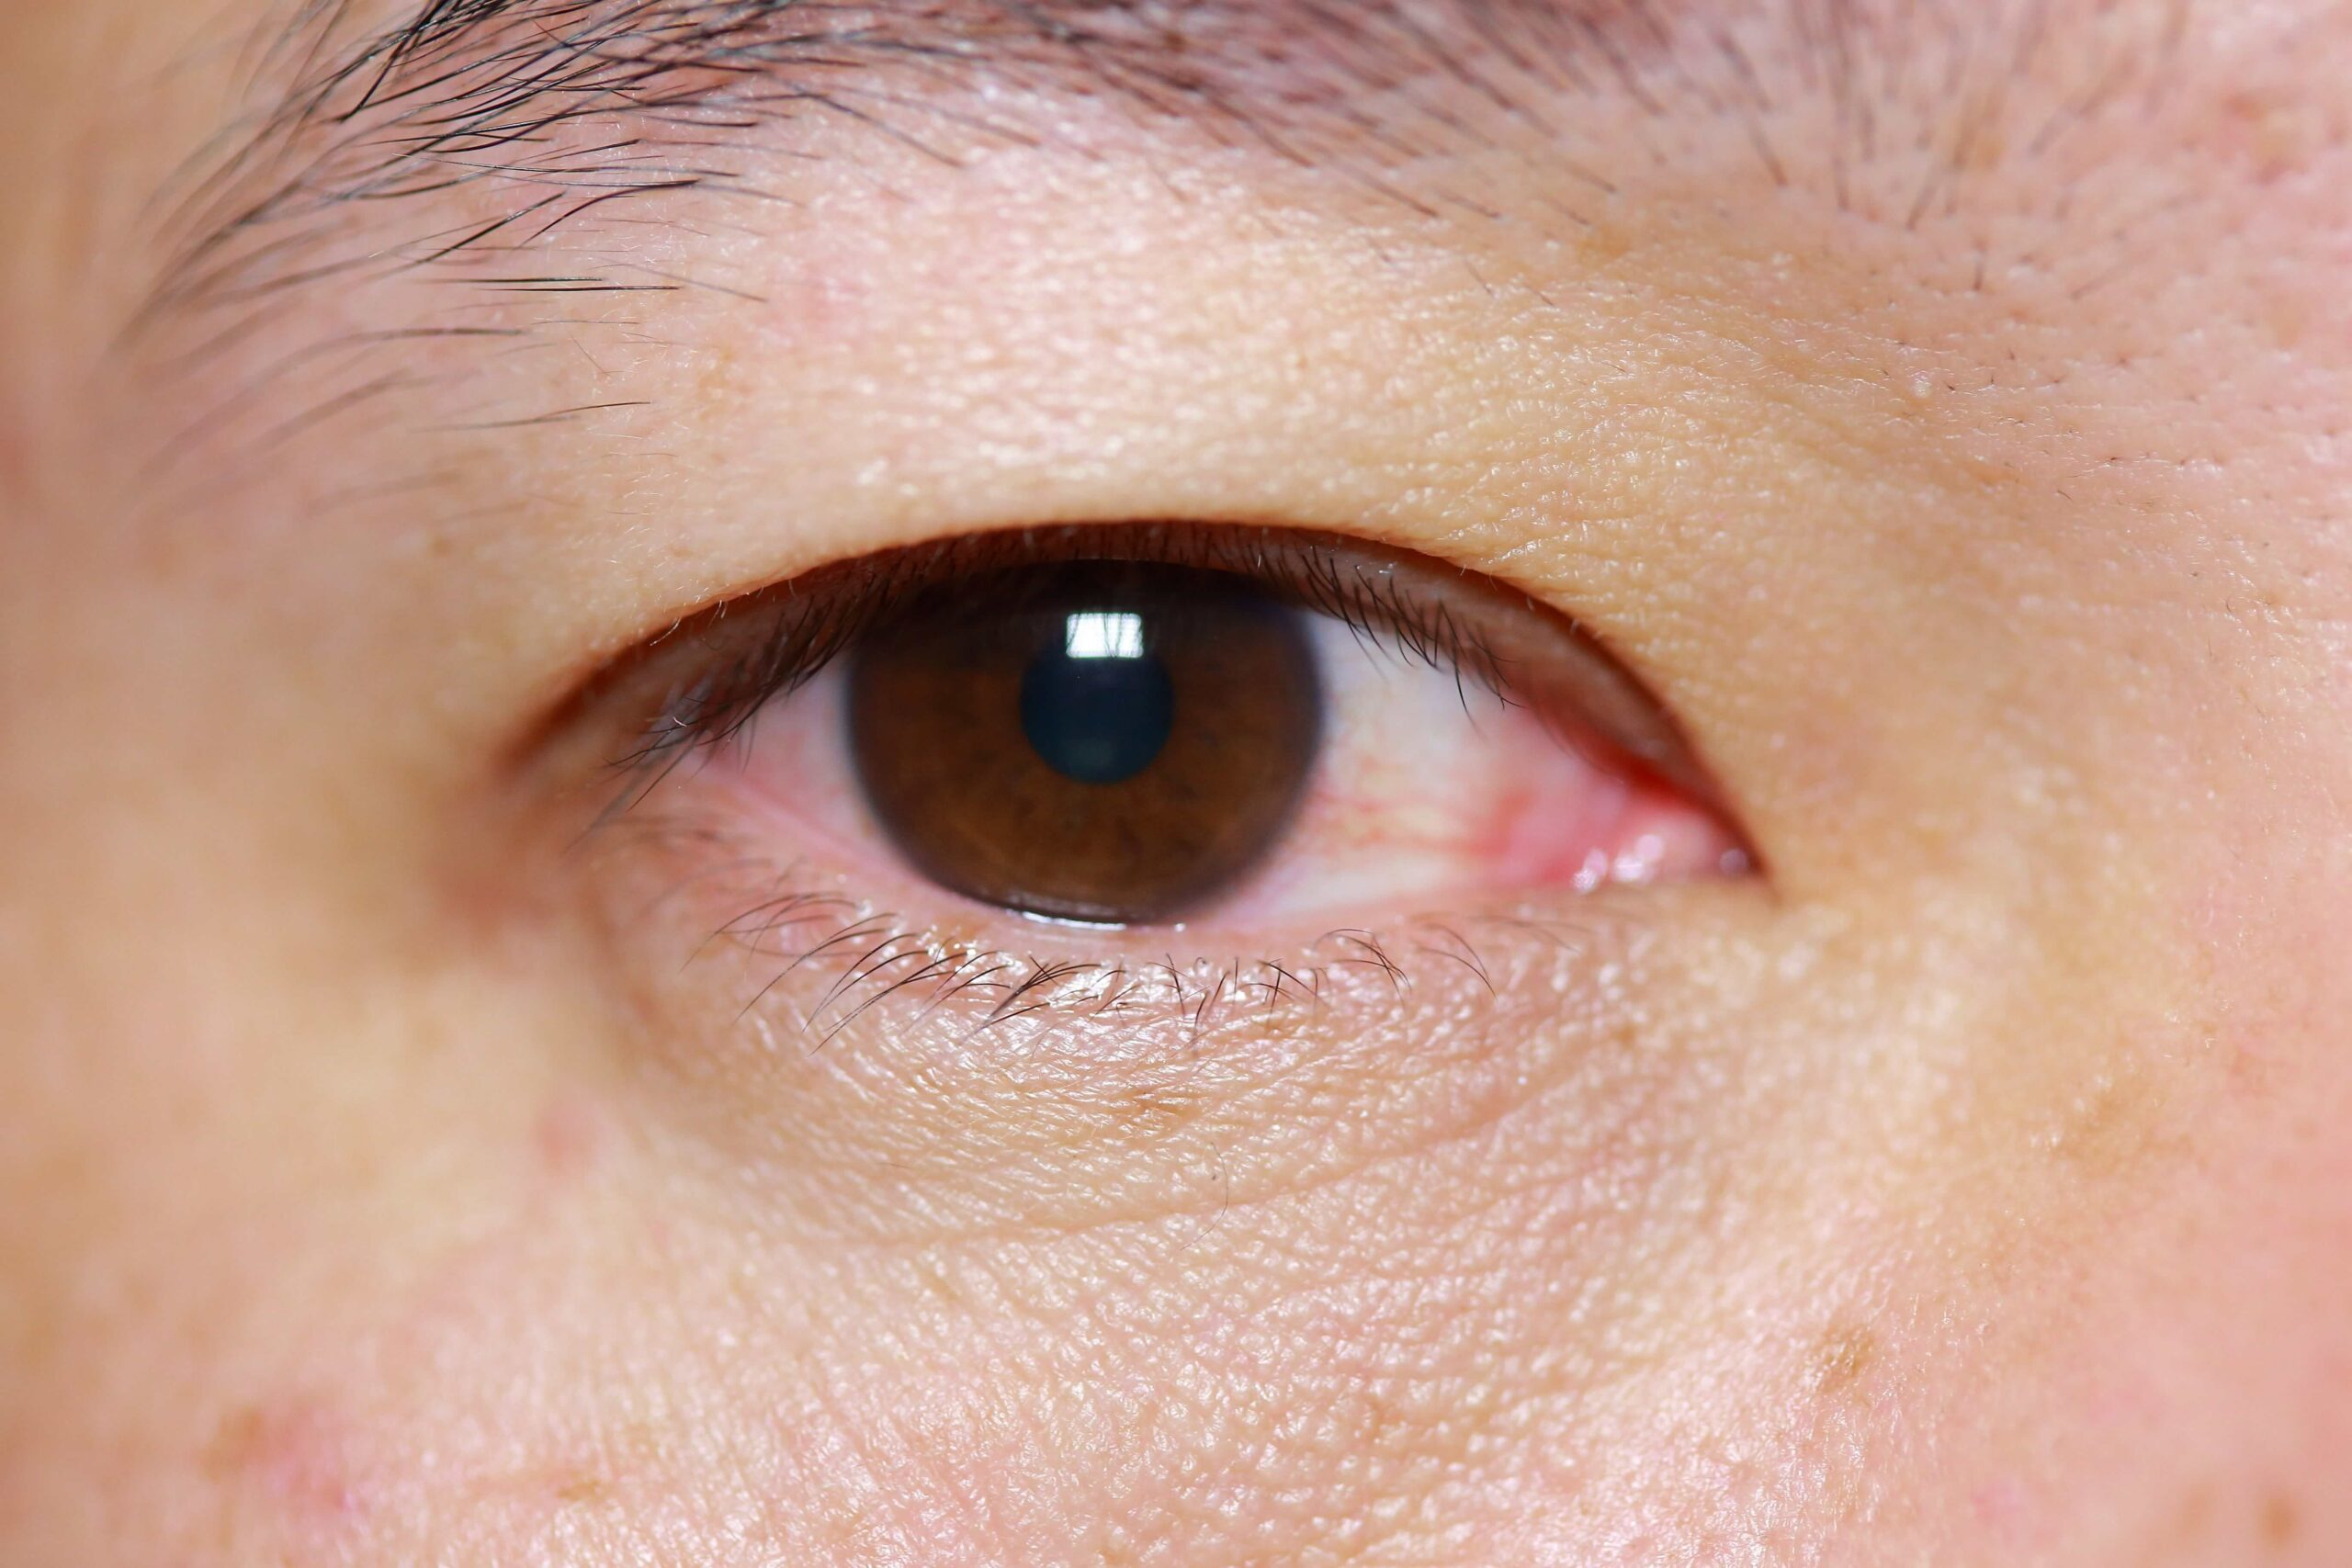 How to protect yourself and others from “Pink Eye”